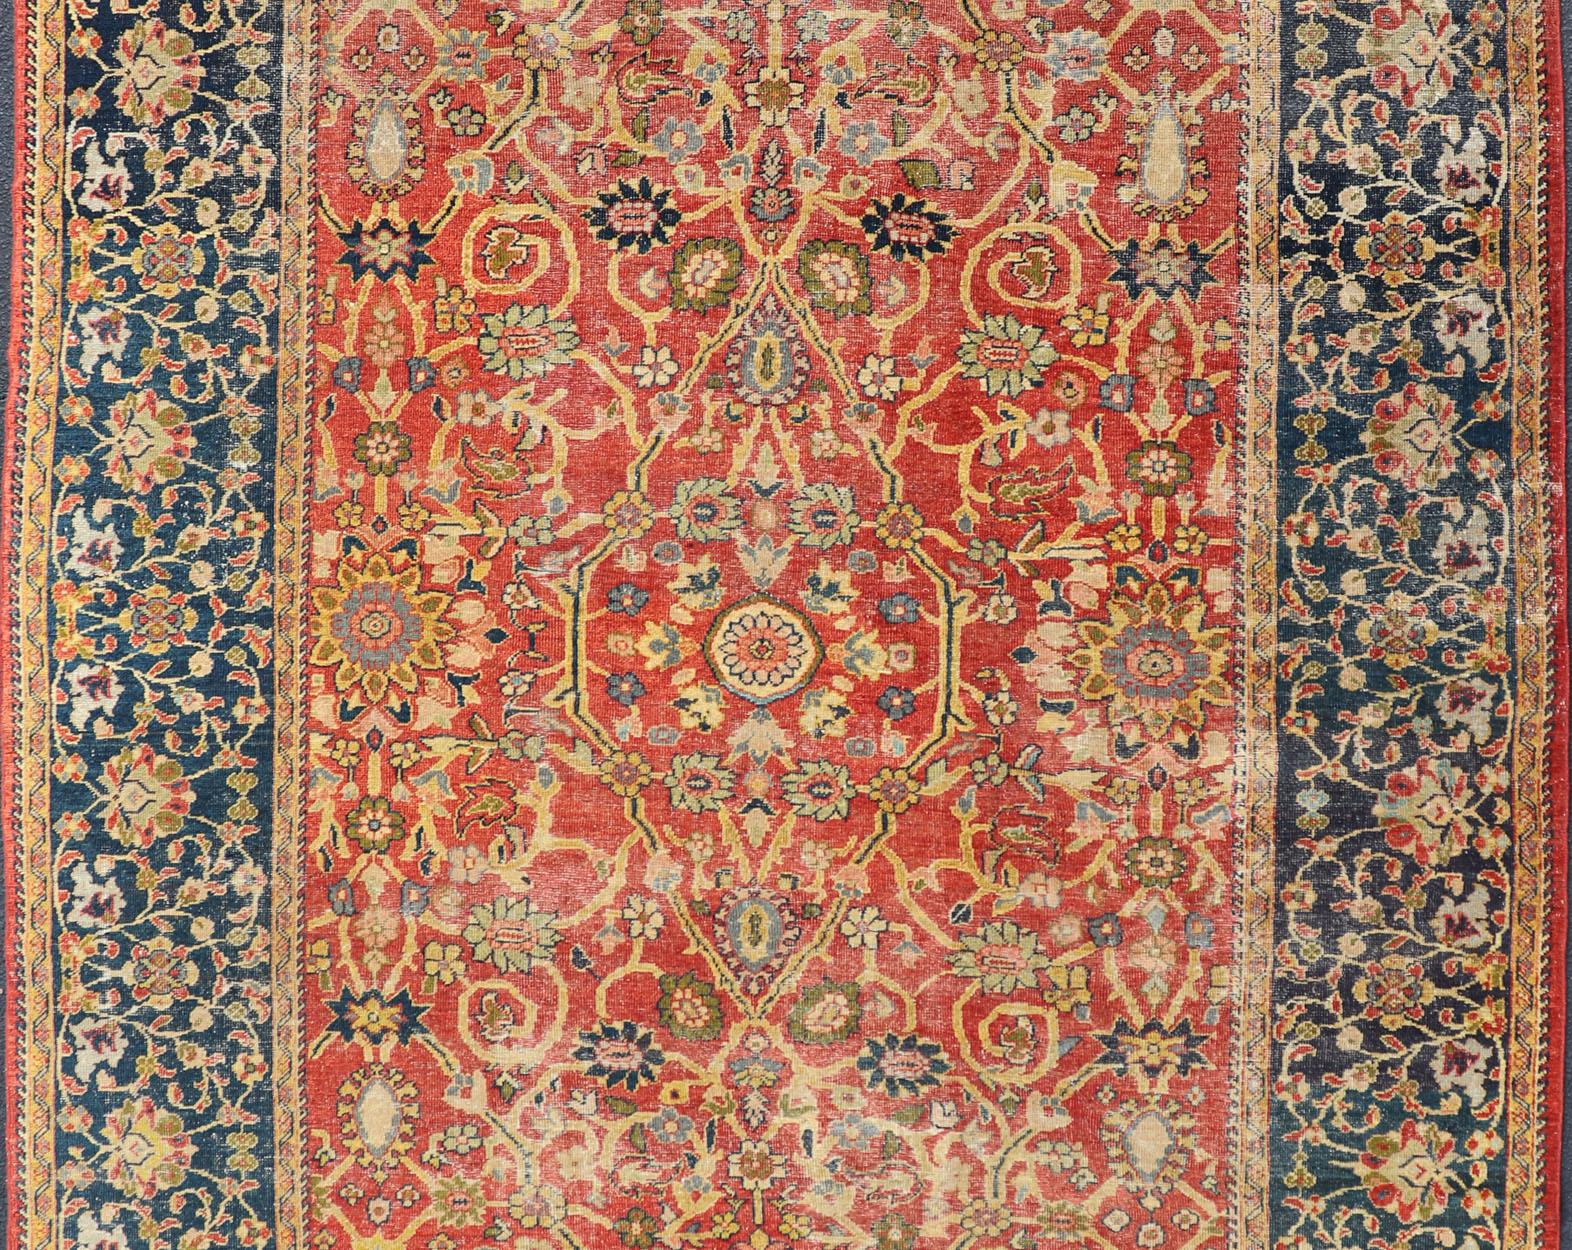 Hand-Knotted Antique Persian, 19th Century Sultanabad Rug in Rust, Blue, Gold, Yellow & Green For Sale